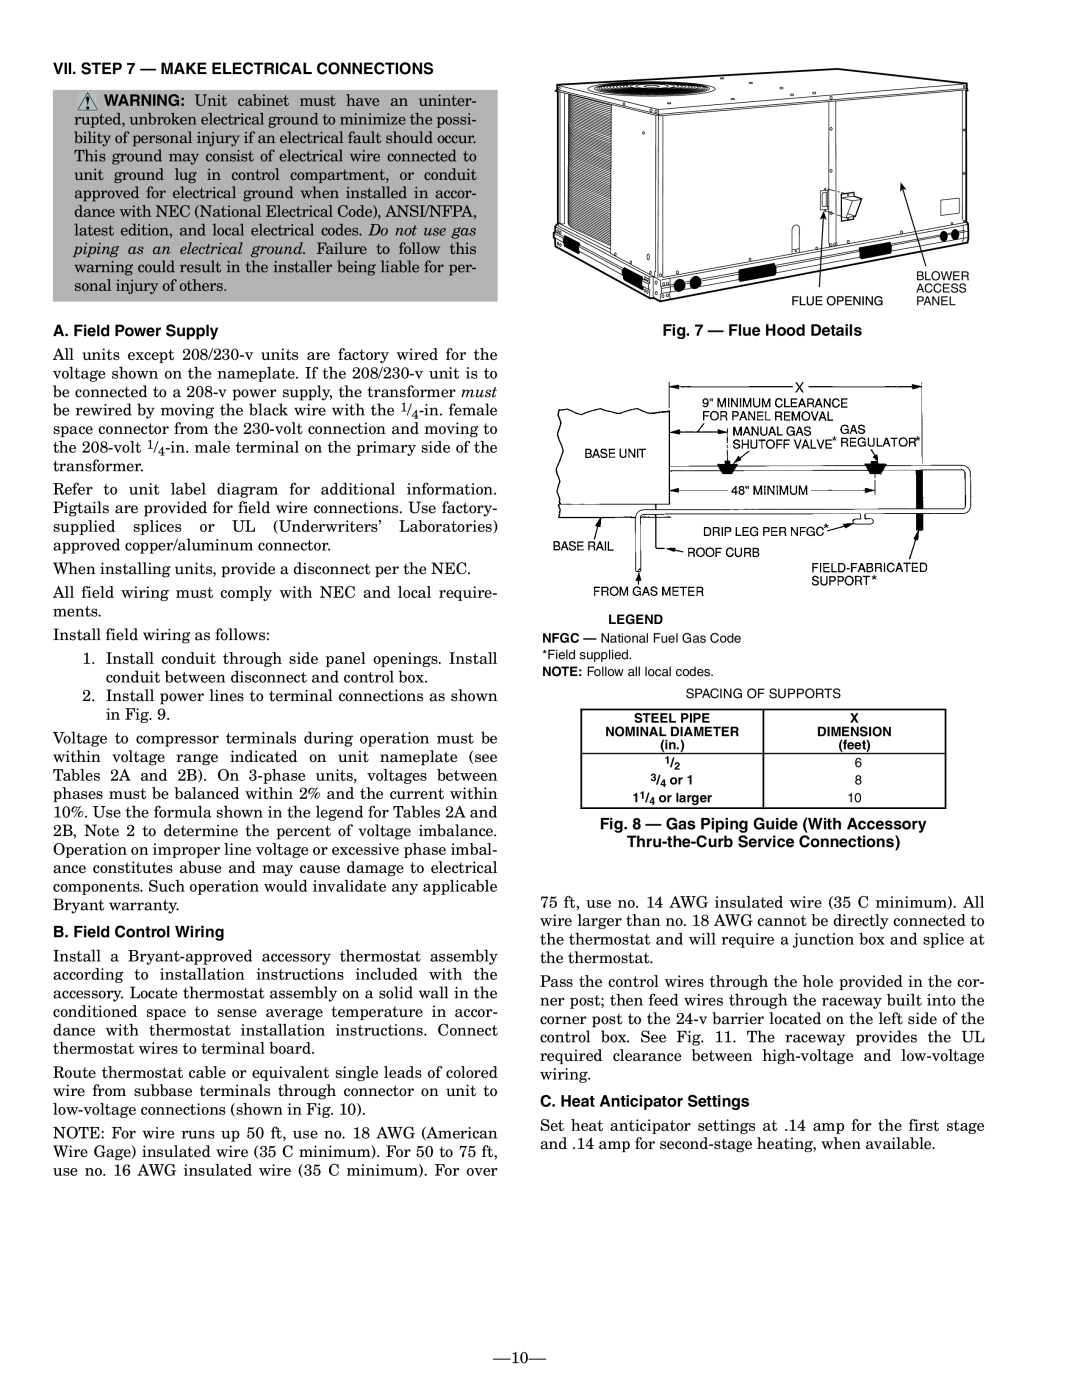 Bryant 580F Vii. - Make Electrical Connections, A. Field Power Supply, B. Field Control Wiring, Flue Hood Details 